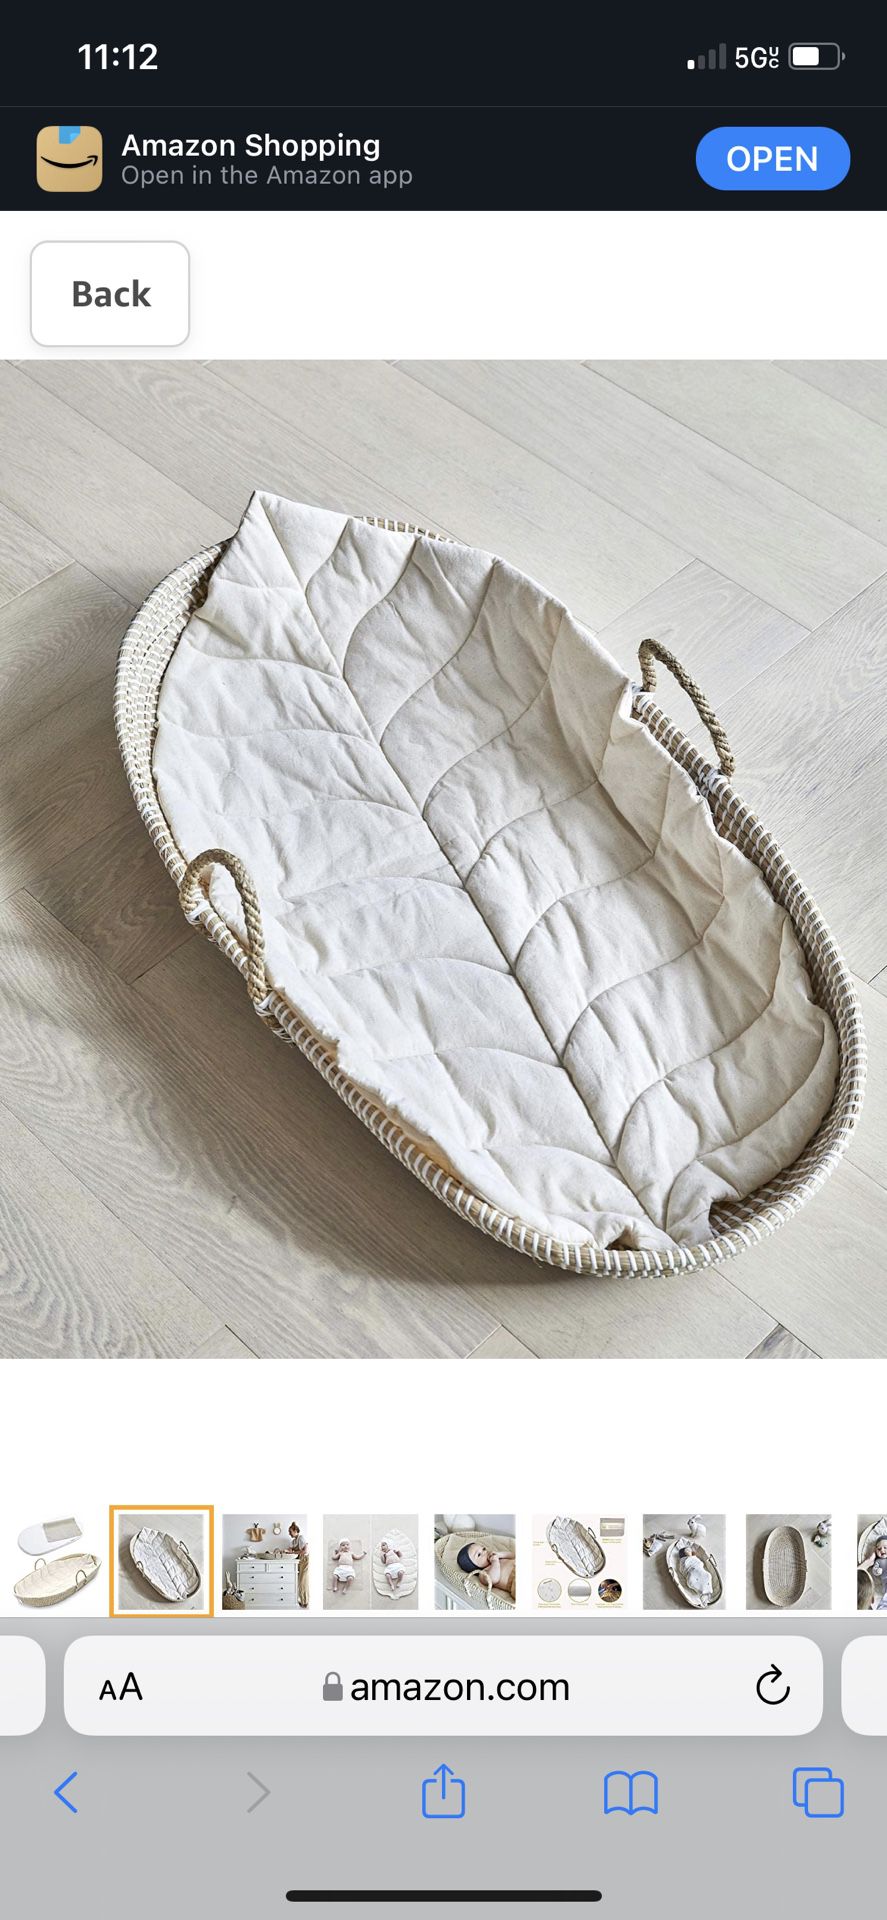 Bebe Bask - - Handmade Baby Changing Basket - - 100% Natural Organic Seagrass & Cotton Moses Basket - - Waterproof Bamboo Pad, & Thick, Soft Luxury Le